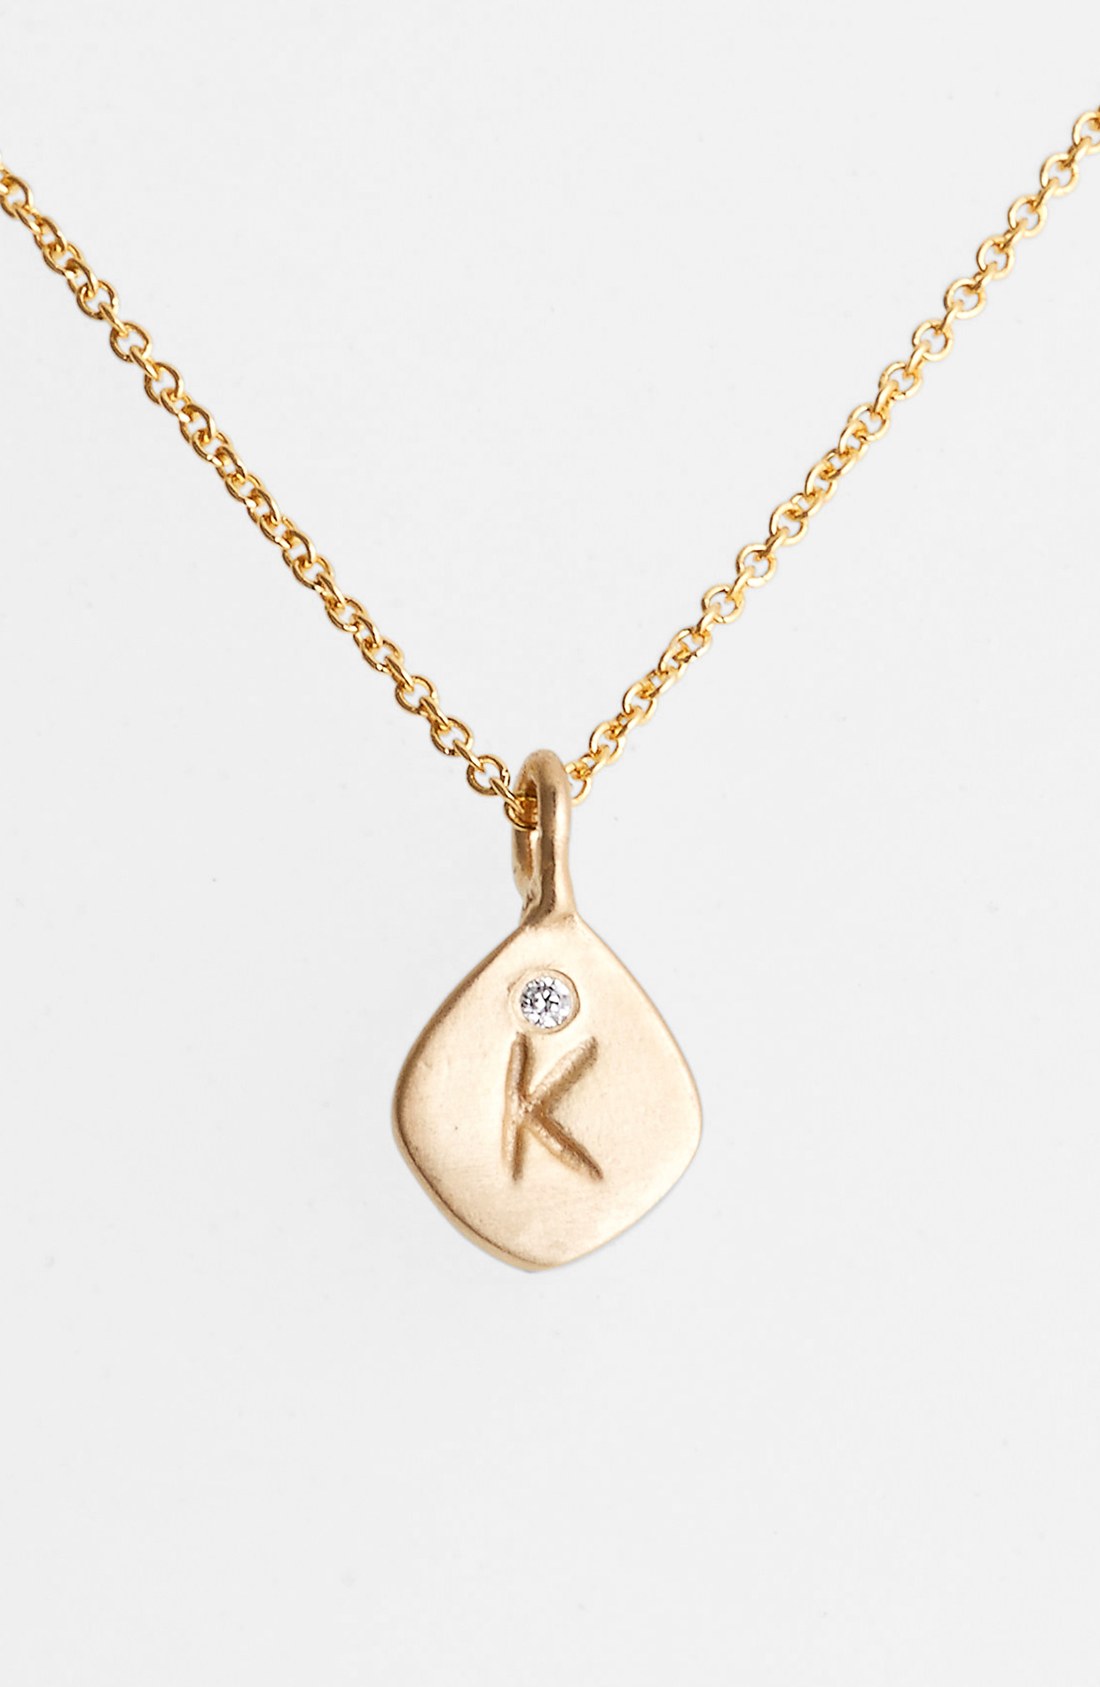 Nunu Designs Small Initial Pendant Necklace in Gold (K - Gold) | Lyst